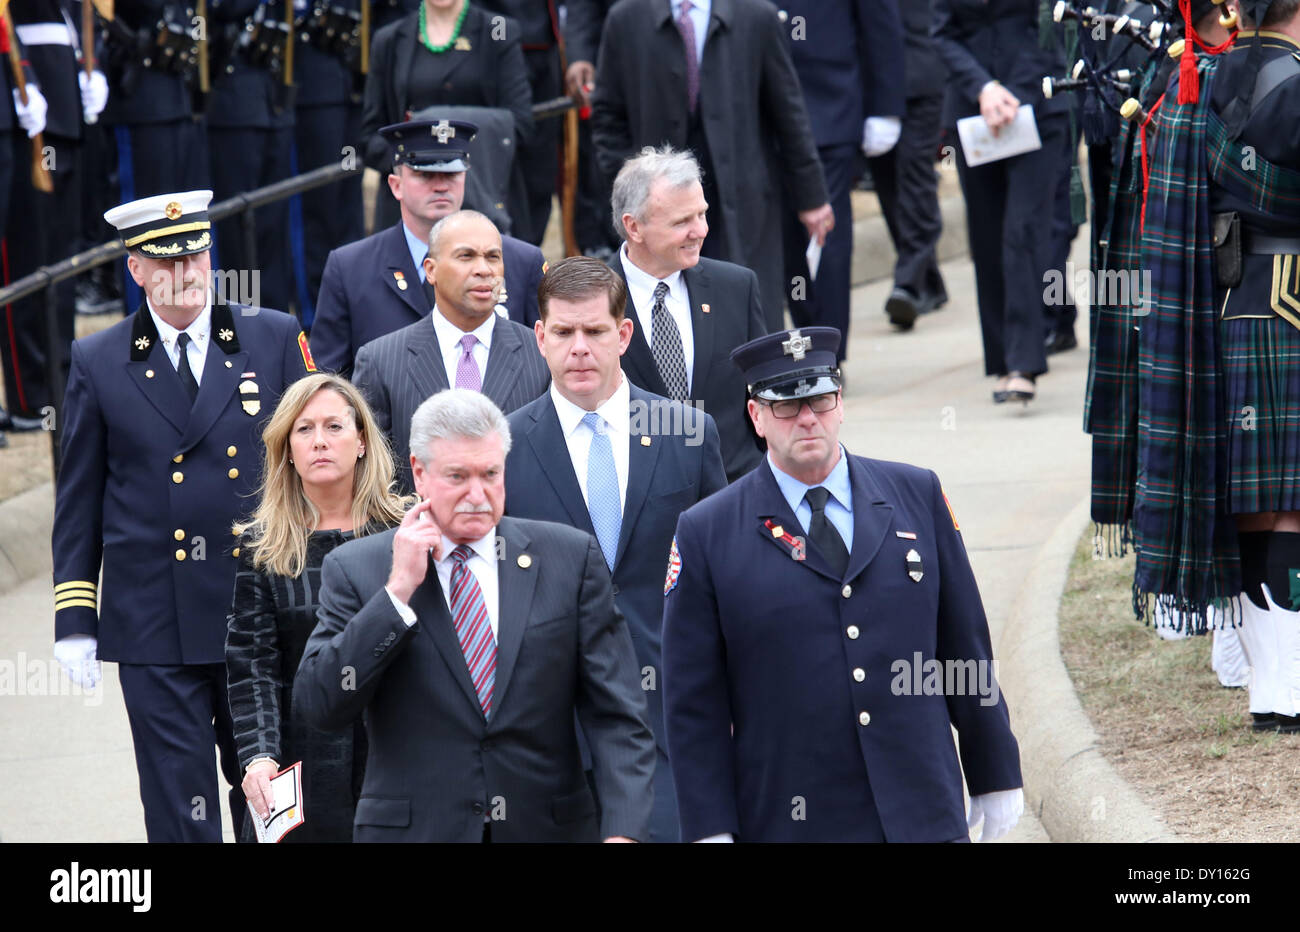 Watertown, Massachusetts, USA. 2nd Apr, 2014. Thousands of firefighters from across the nation gathered outside the Church of Saint Patrick in Watertown, Massachusetts to attend the funeral of fallen Boston Firefighter Lieutenant Edward Walsh. Walsh and fellow firefighter Michael Kennedy died in a nine-alarm blaze at 298 Beacon Street in Boston, Massachusetts. Boston Mayor Marty Walsh, center, and his girlfriend, Lorrie Higgins by his side, attend the service along with Massachusetts Govenor Deval Patrick, rear center. Credit:  Nicolaus Czarnecki/METRO Boston/ZUMAPRESS.com/Alamy Live News Stock Photo